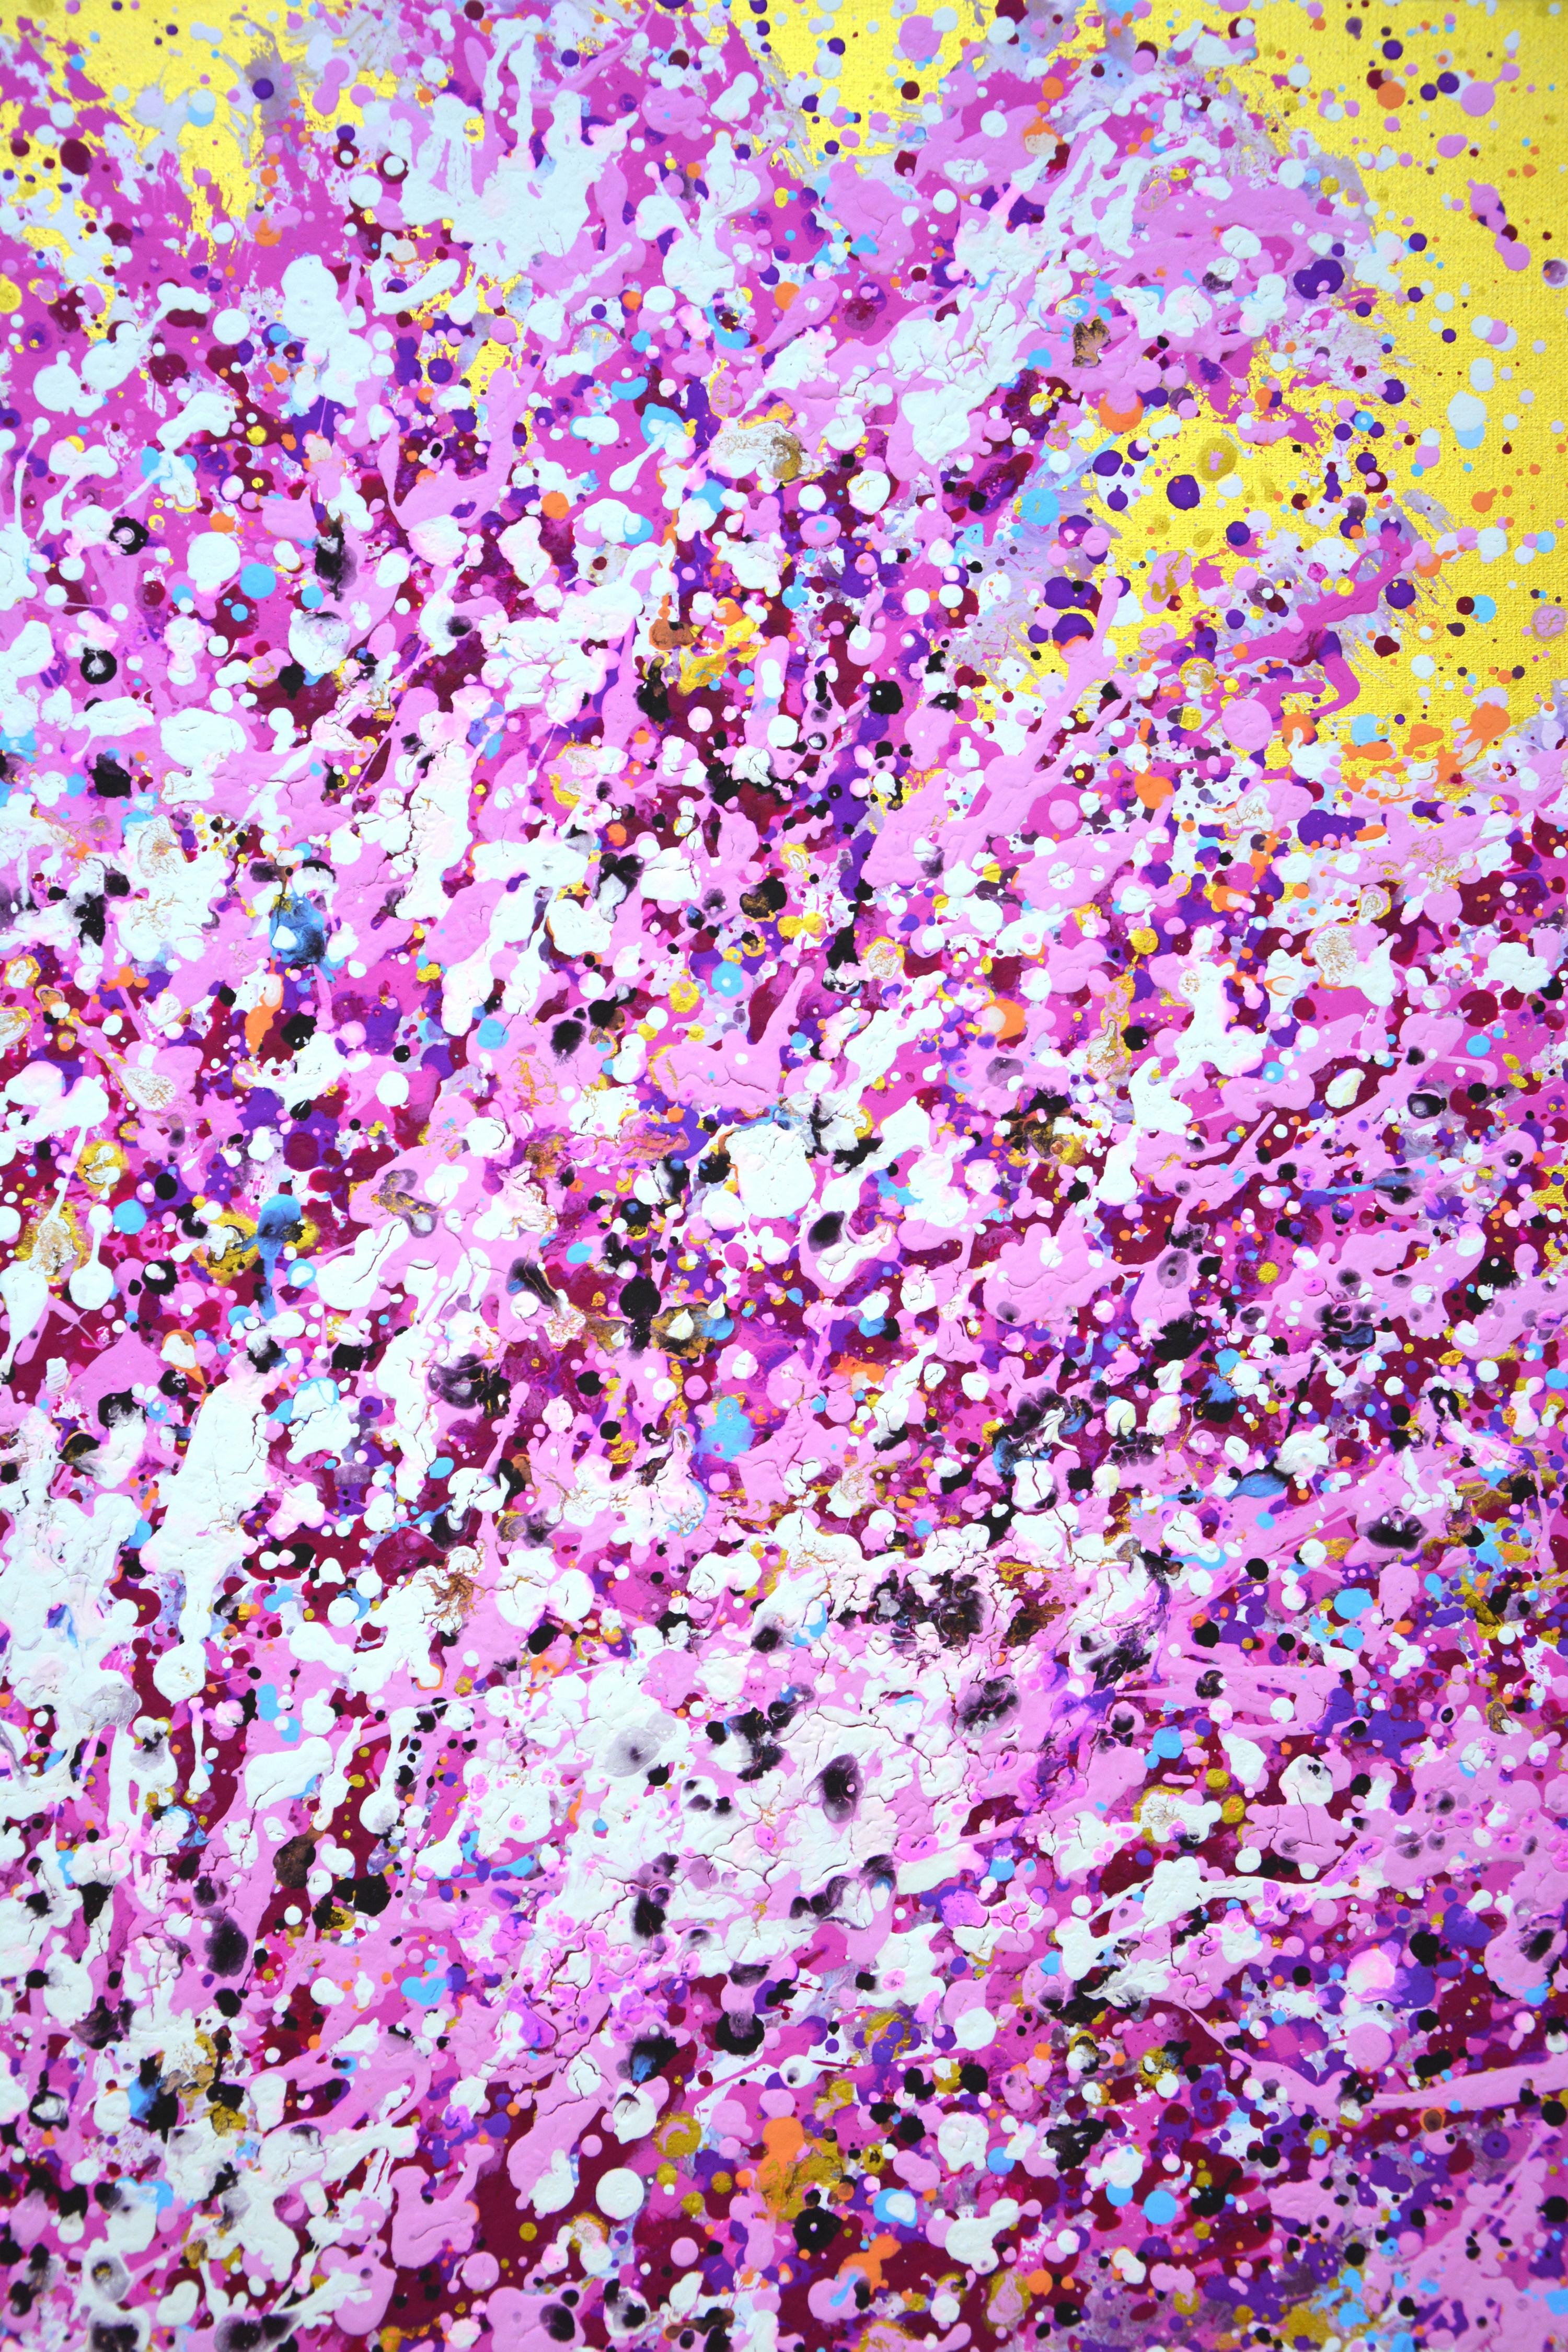 Sakura cherry blossoms 2. Japanese tree. Acrylic paints of pale pink, pink, white on a gold background splattered and splattered, creating a sense of shimmer, movement, and beautiful life. Colors create an atmosphere of relaxation, harmony and